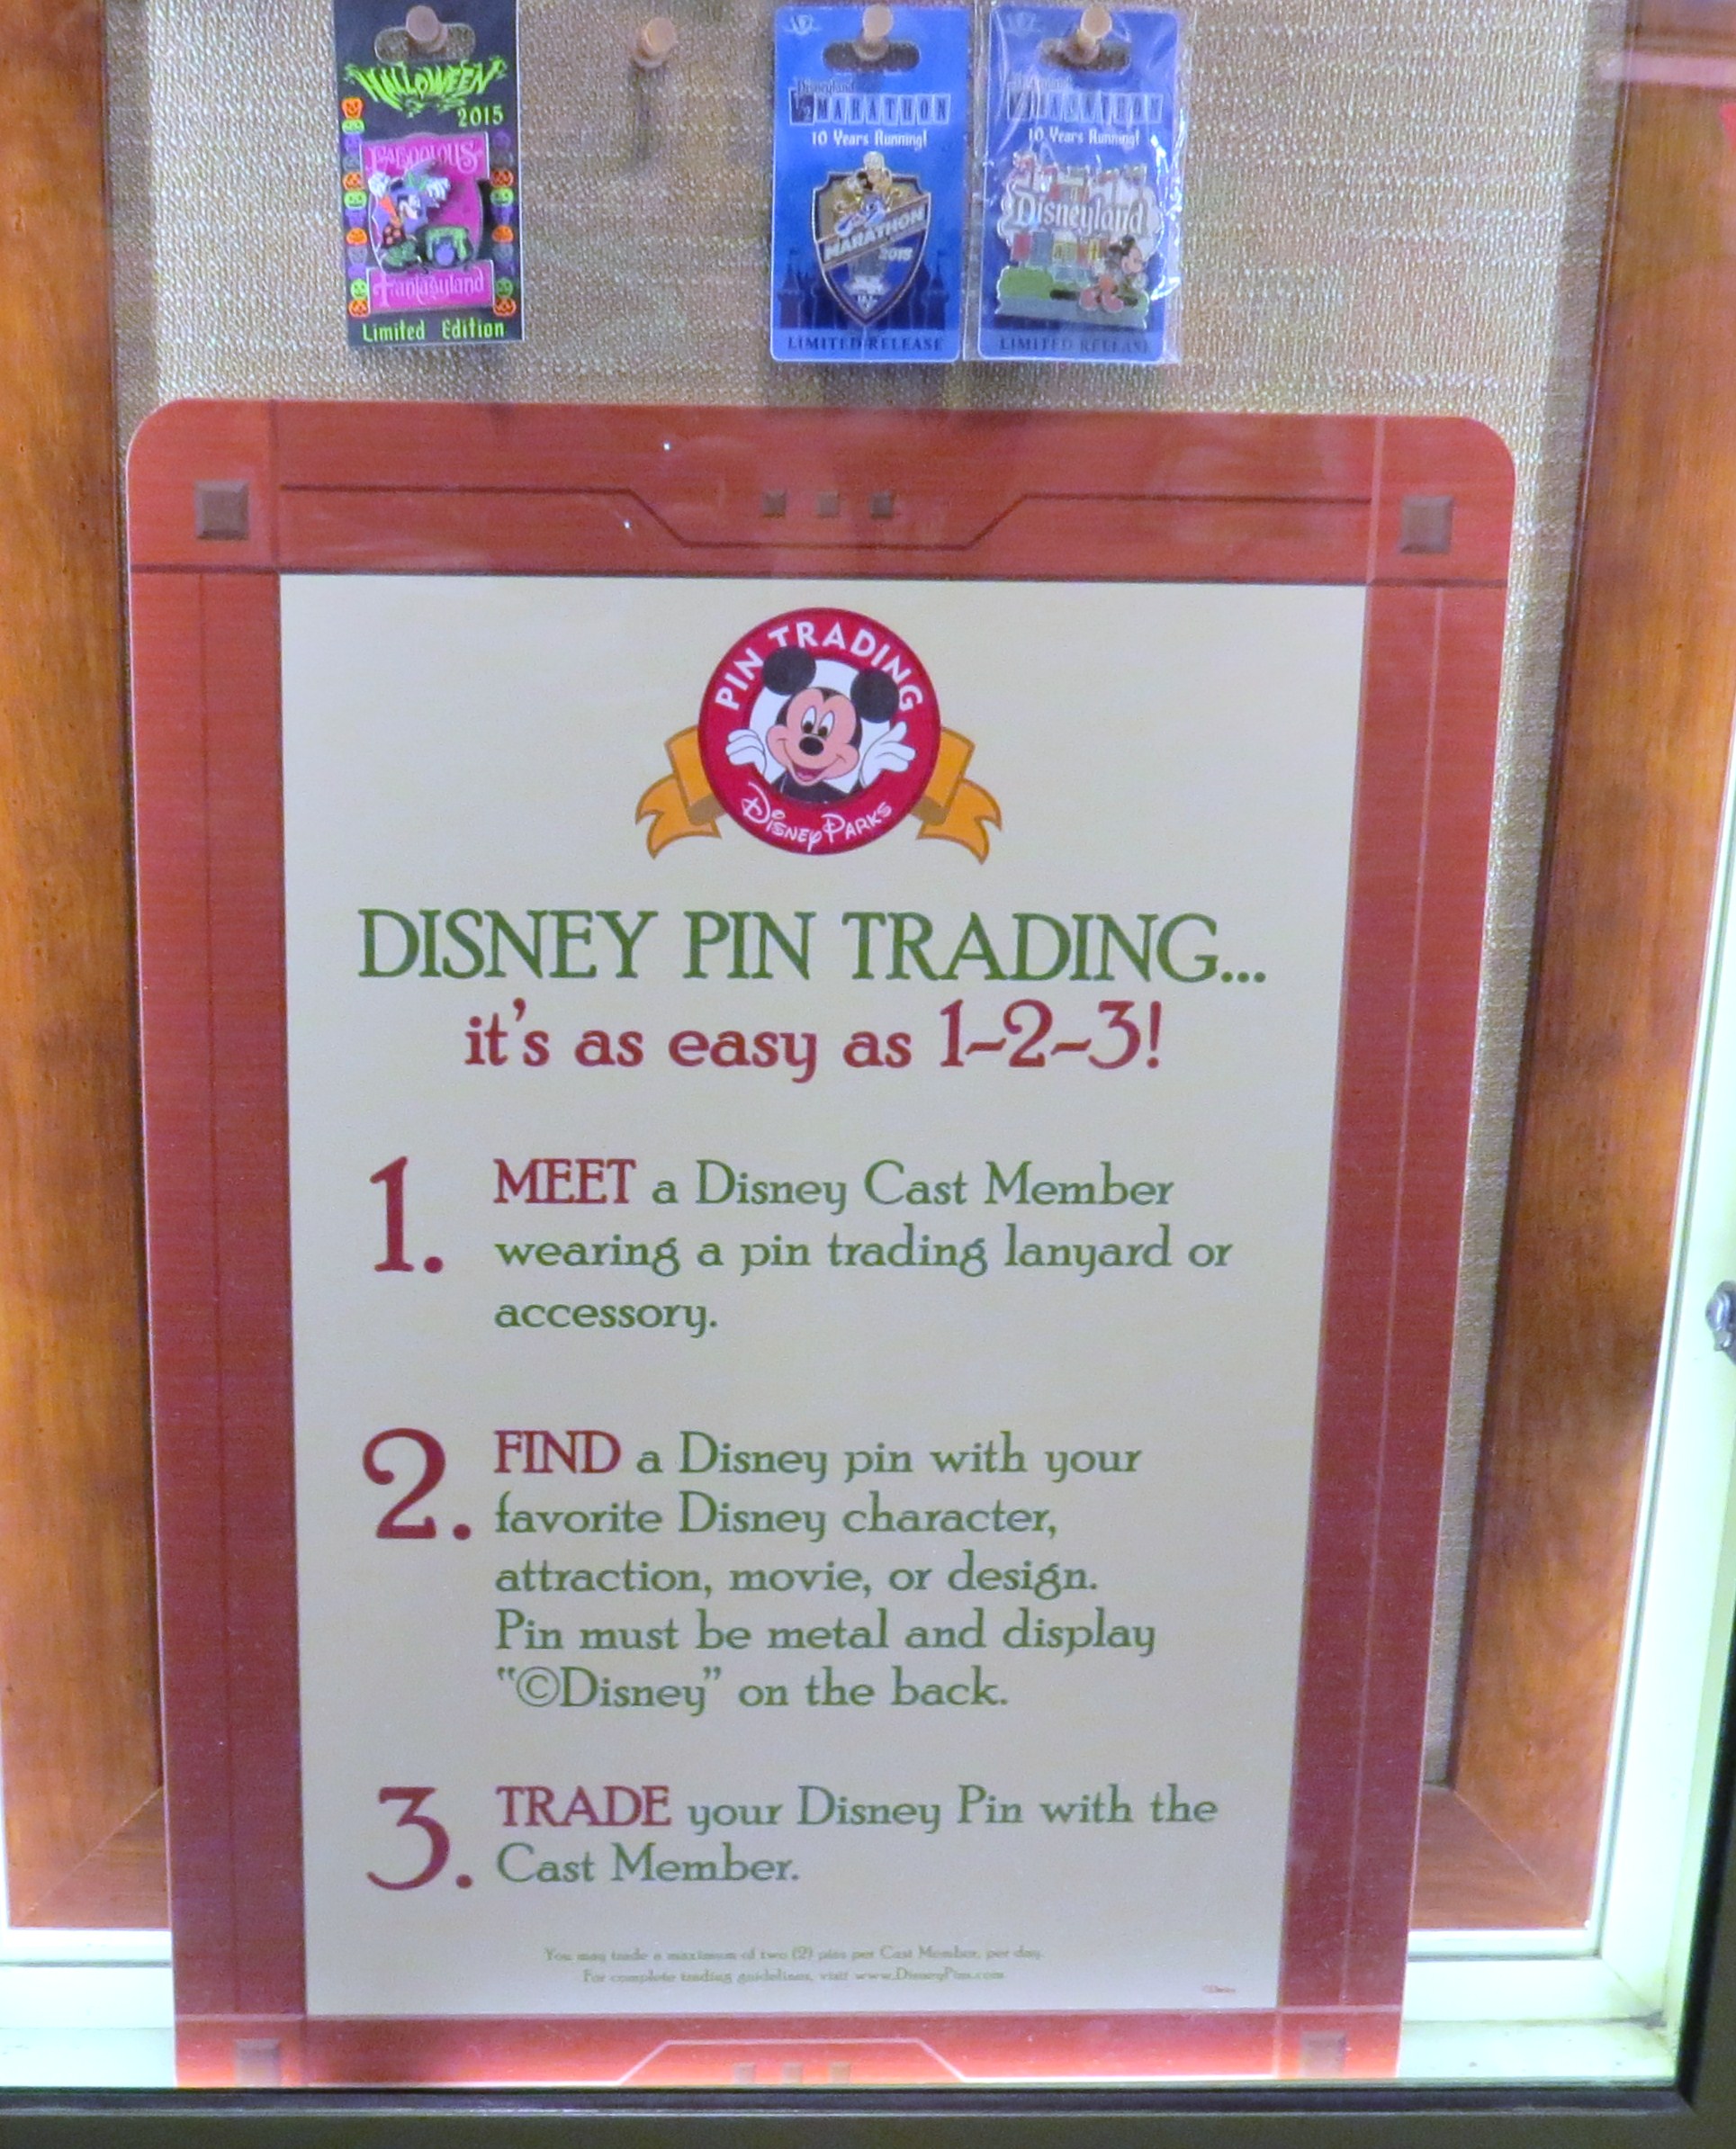 Disney Pin Trading, How Does It Work